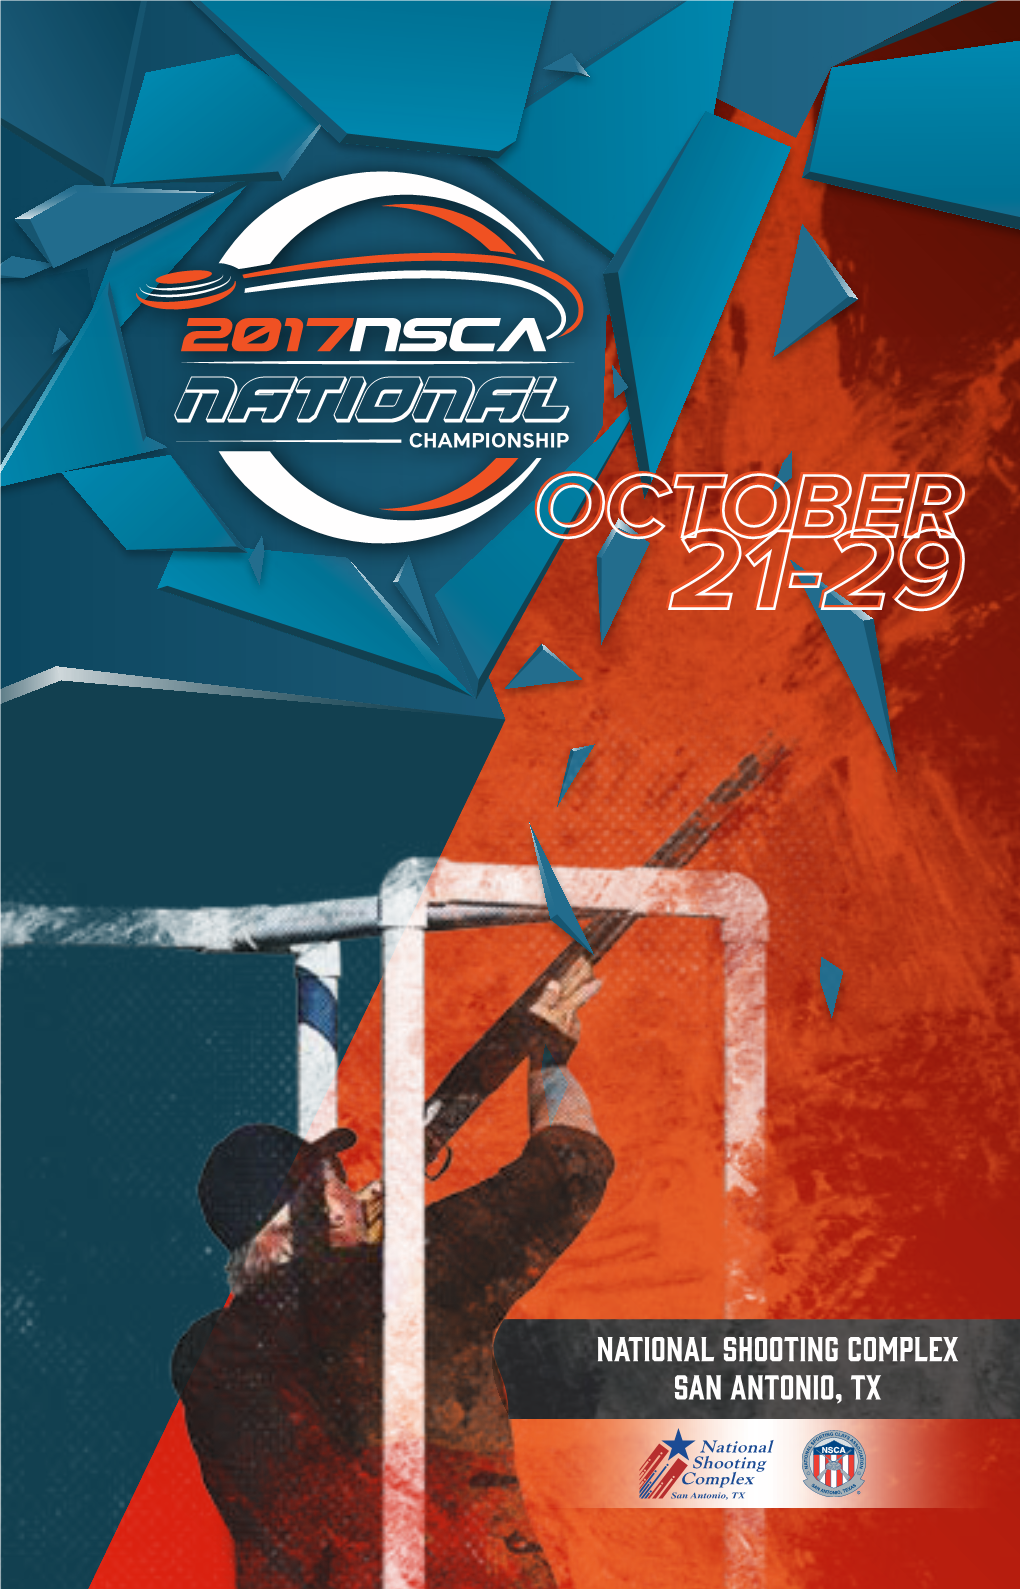 NATIONAL SHOOTING COMPLEX SAN ANTONIO, TX WELCOME to the NSCA 2017 NATIONAL SPORTING CLAYS CHAMPIONSHIP Ladies and Gentlemen